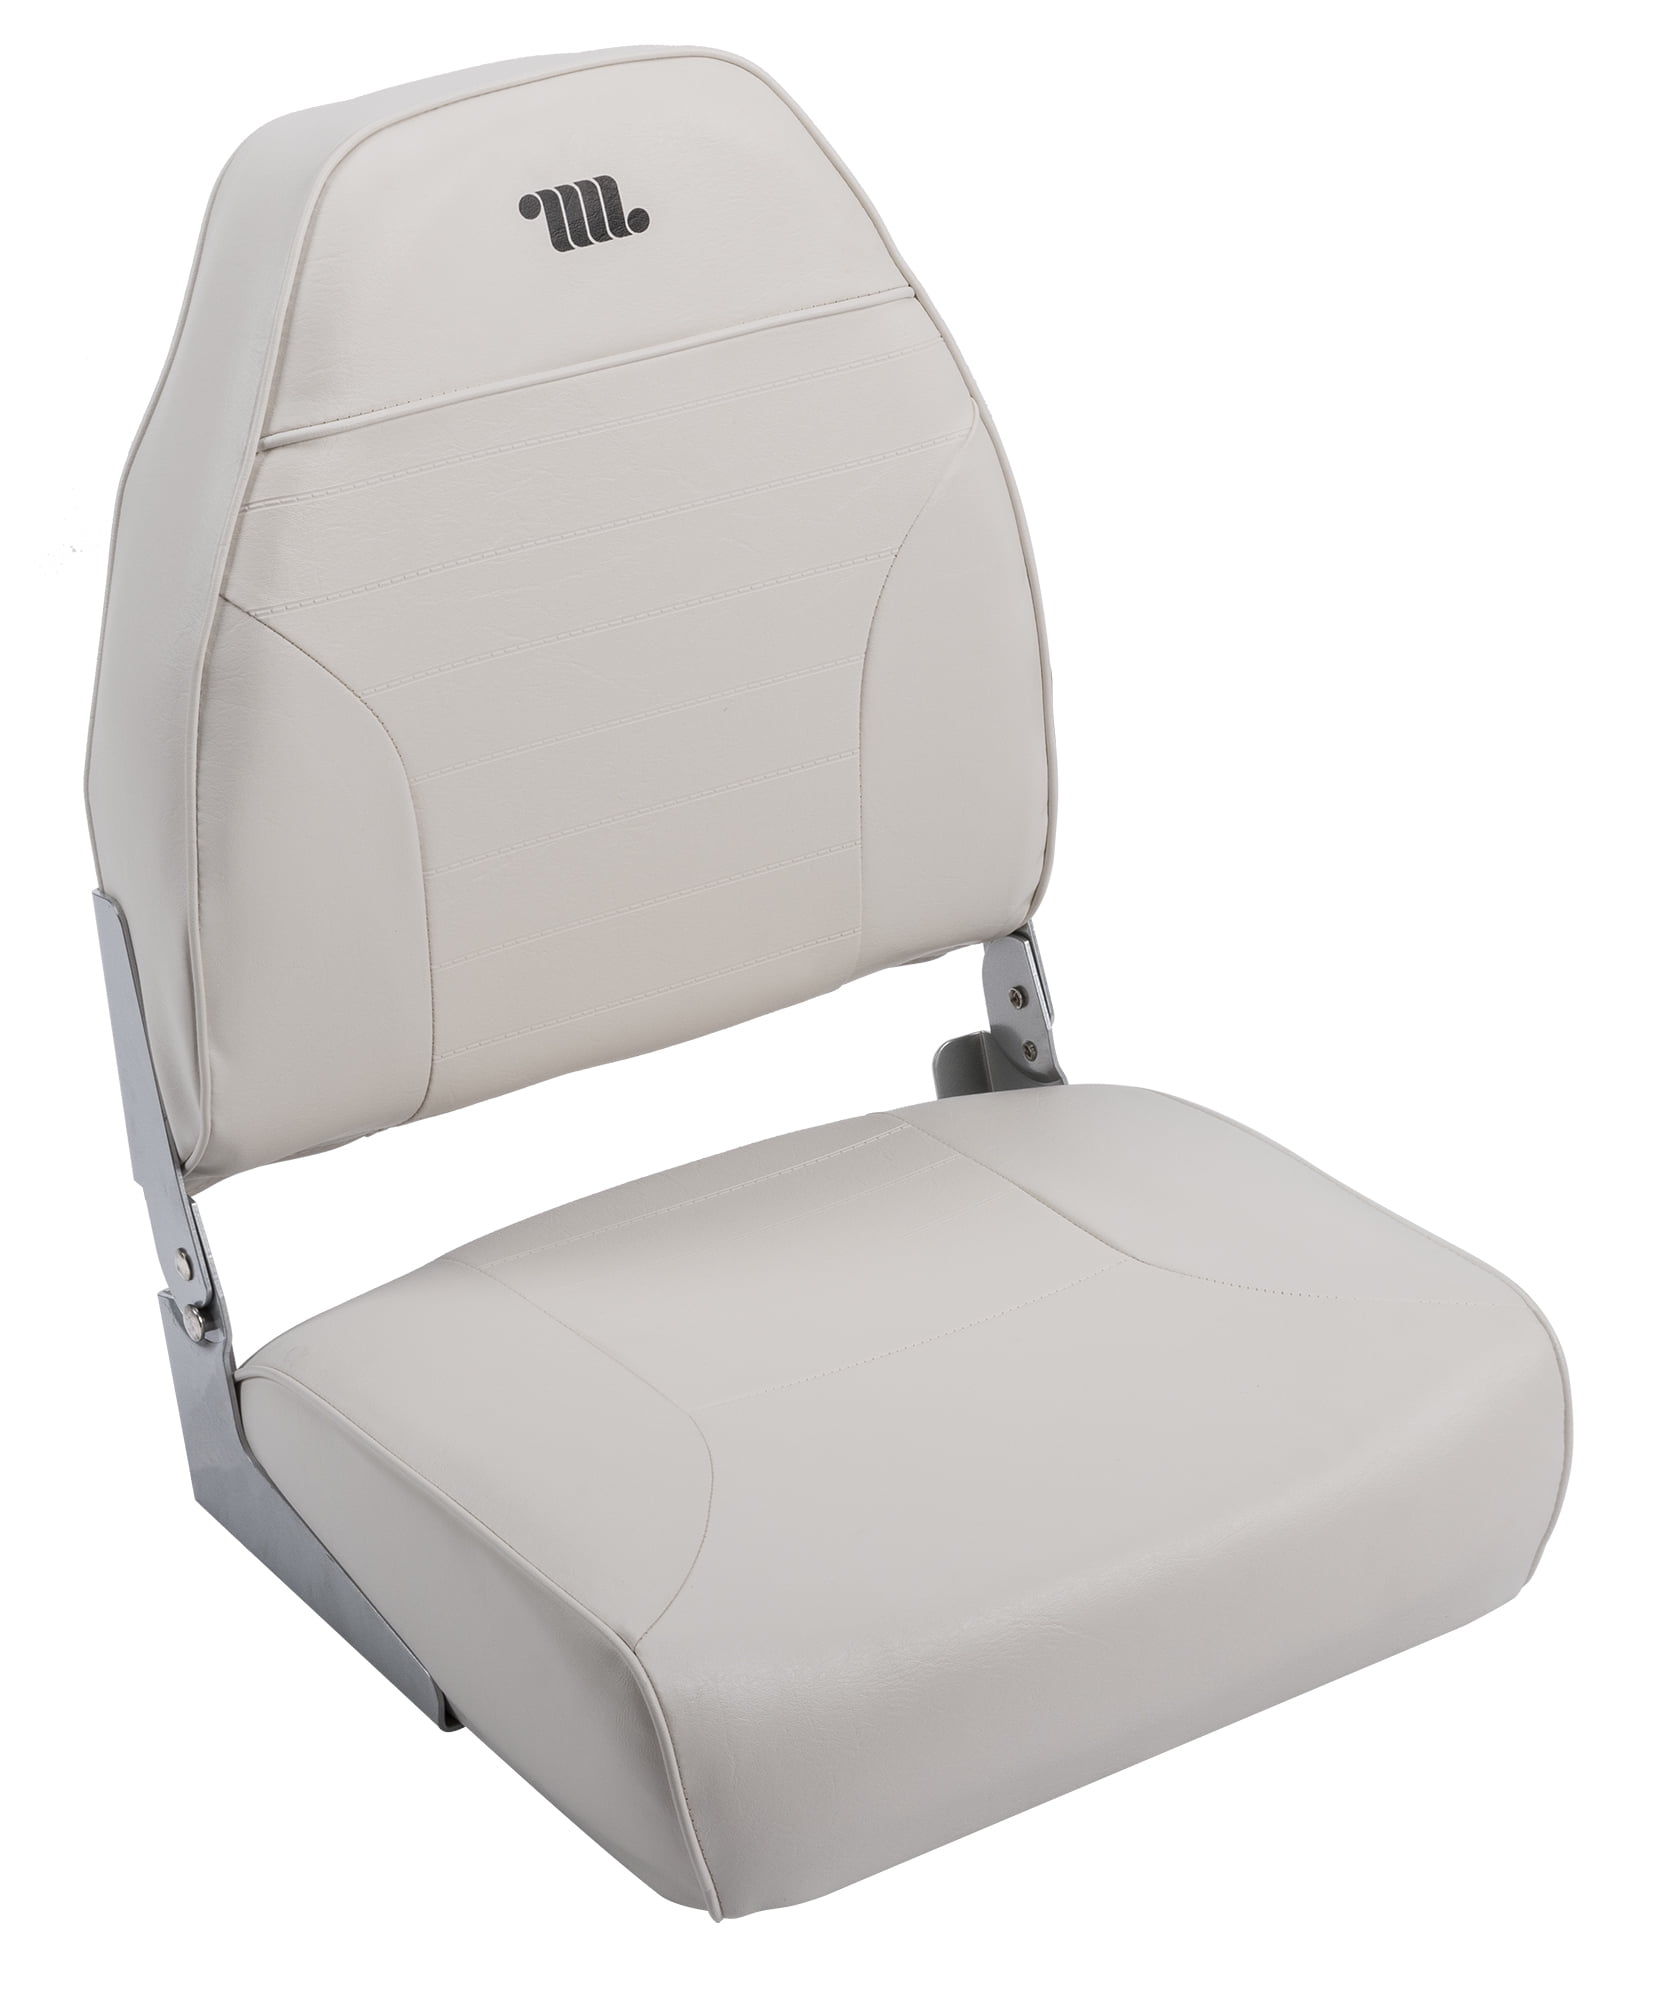 Wise 8wd588pls 660 Mid-back Fishing Boat Seat With Logo Grey Navy for sale online 